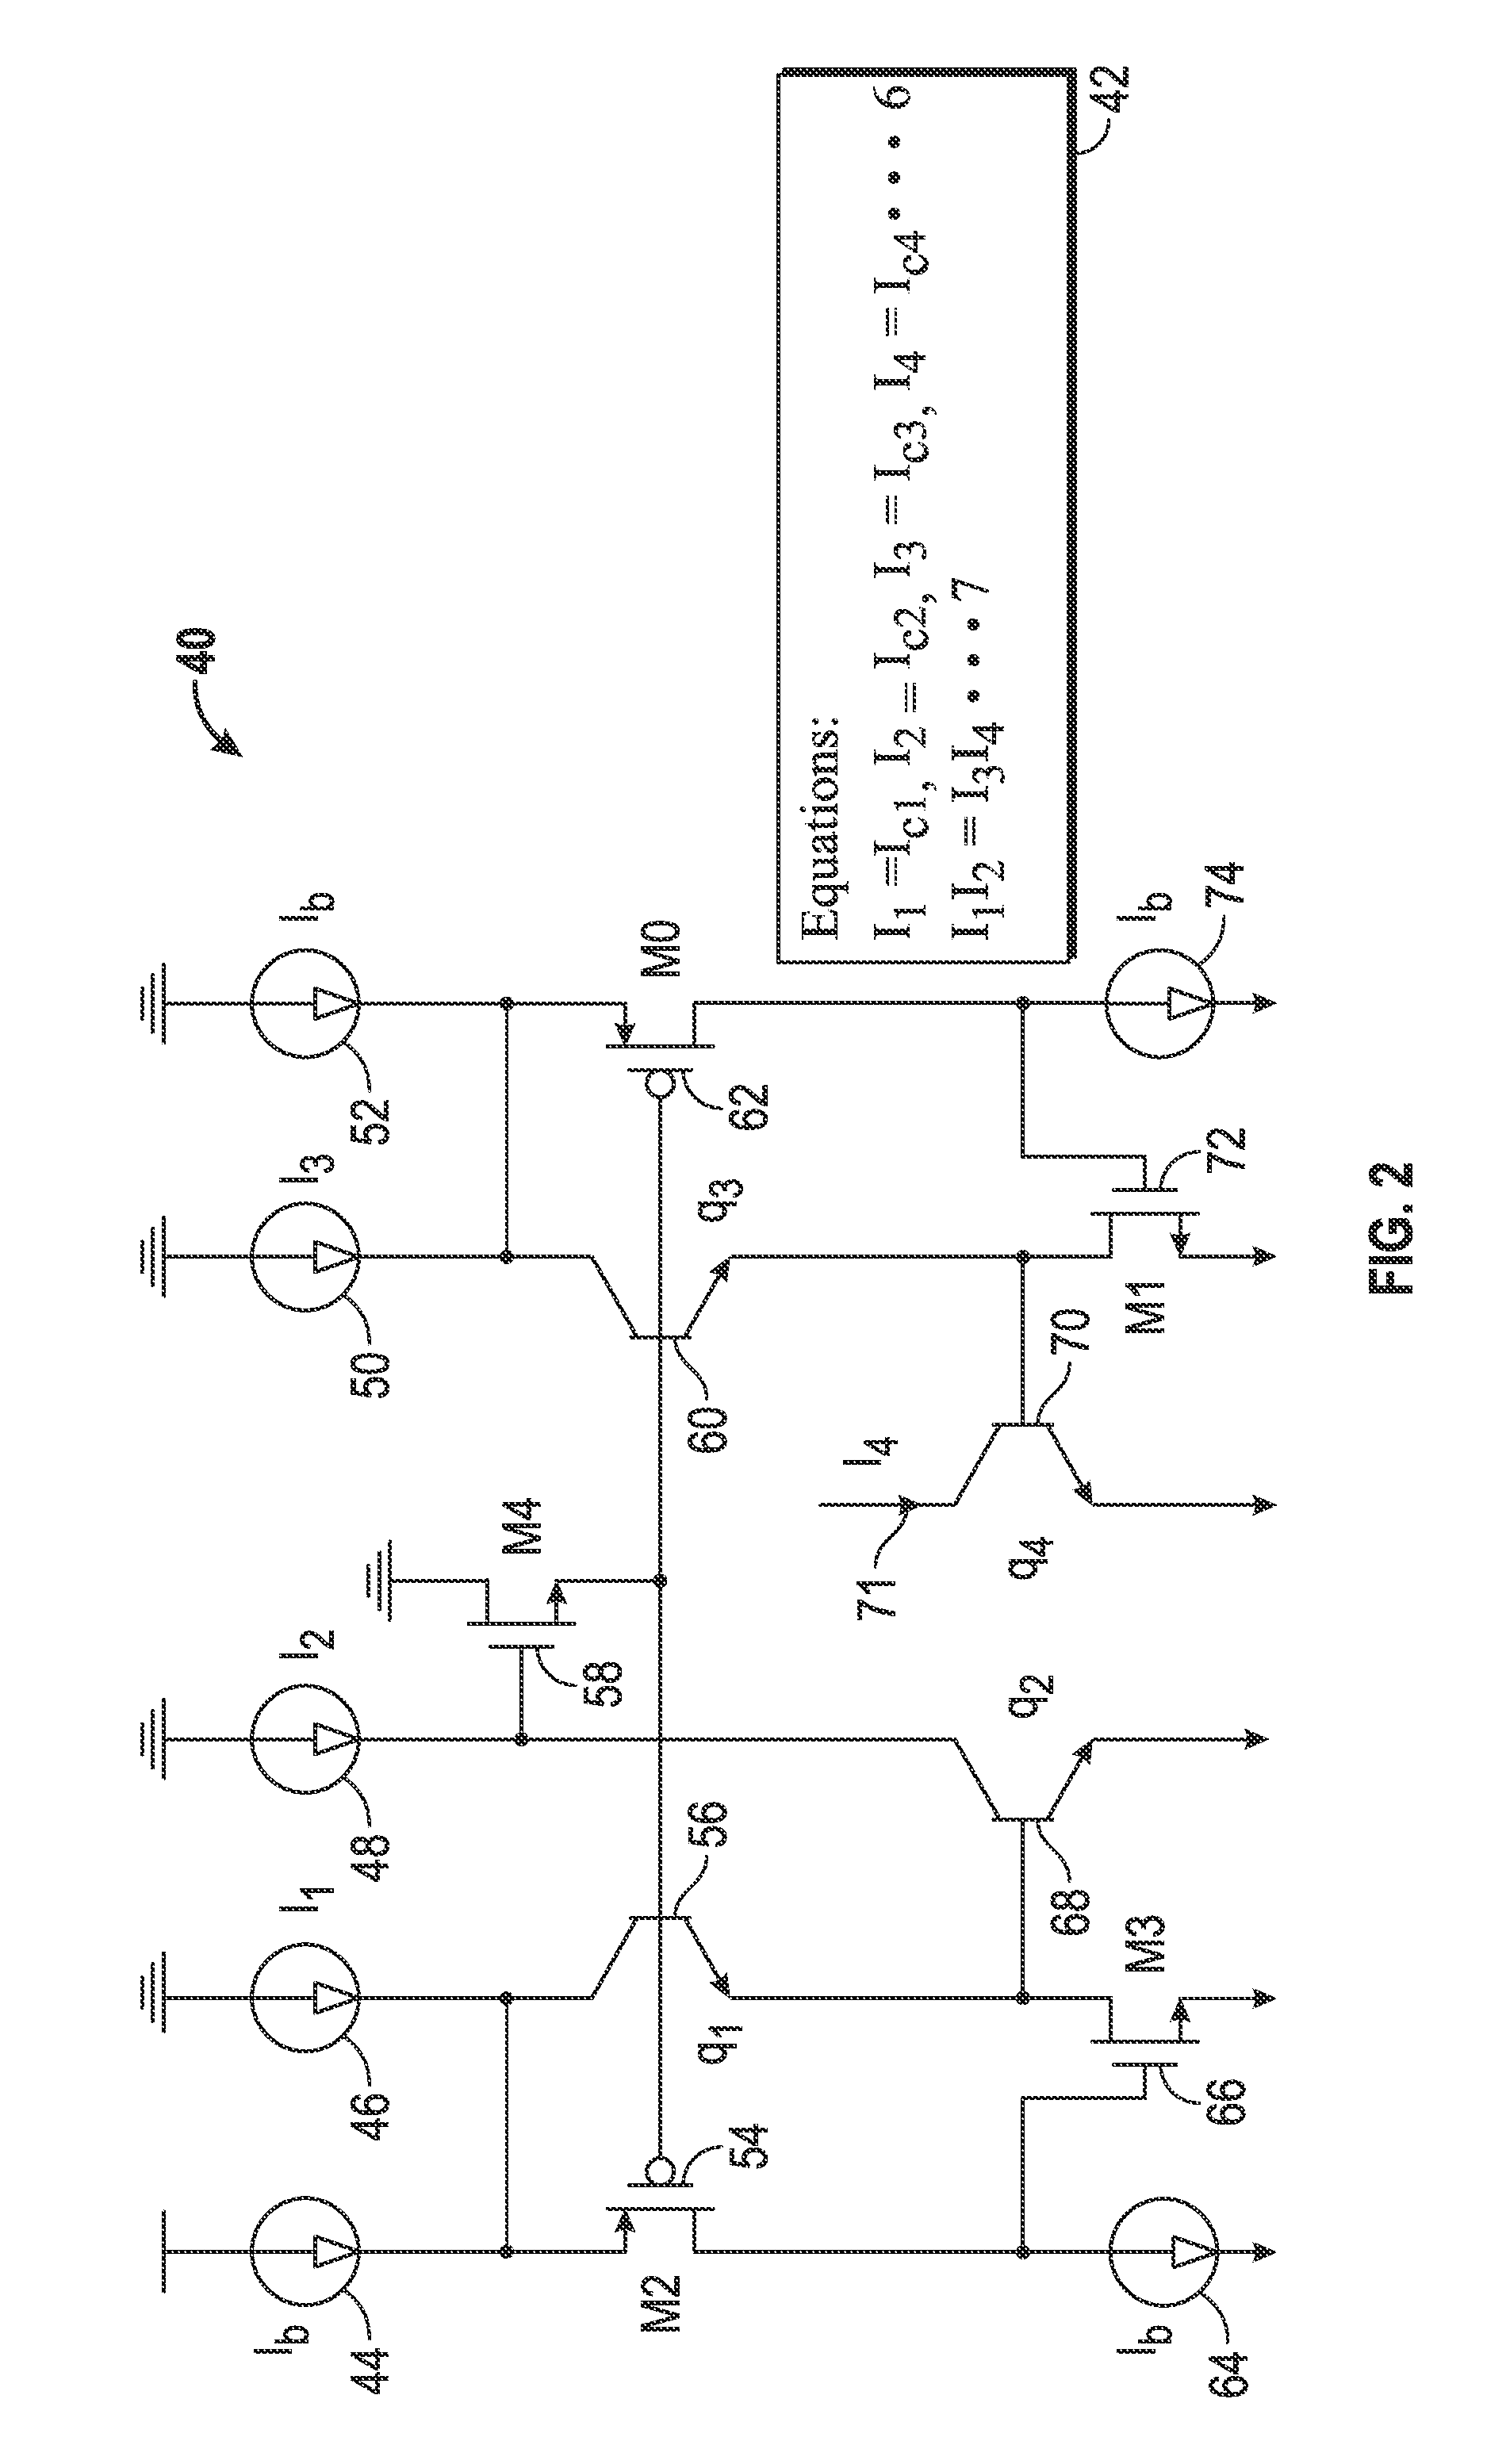 High accuracy bipolar current multiplier with base current compensation